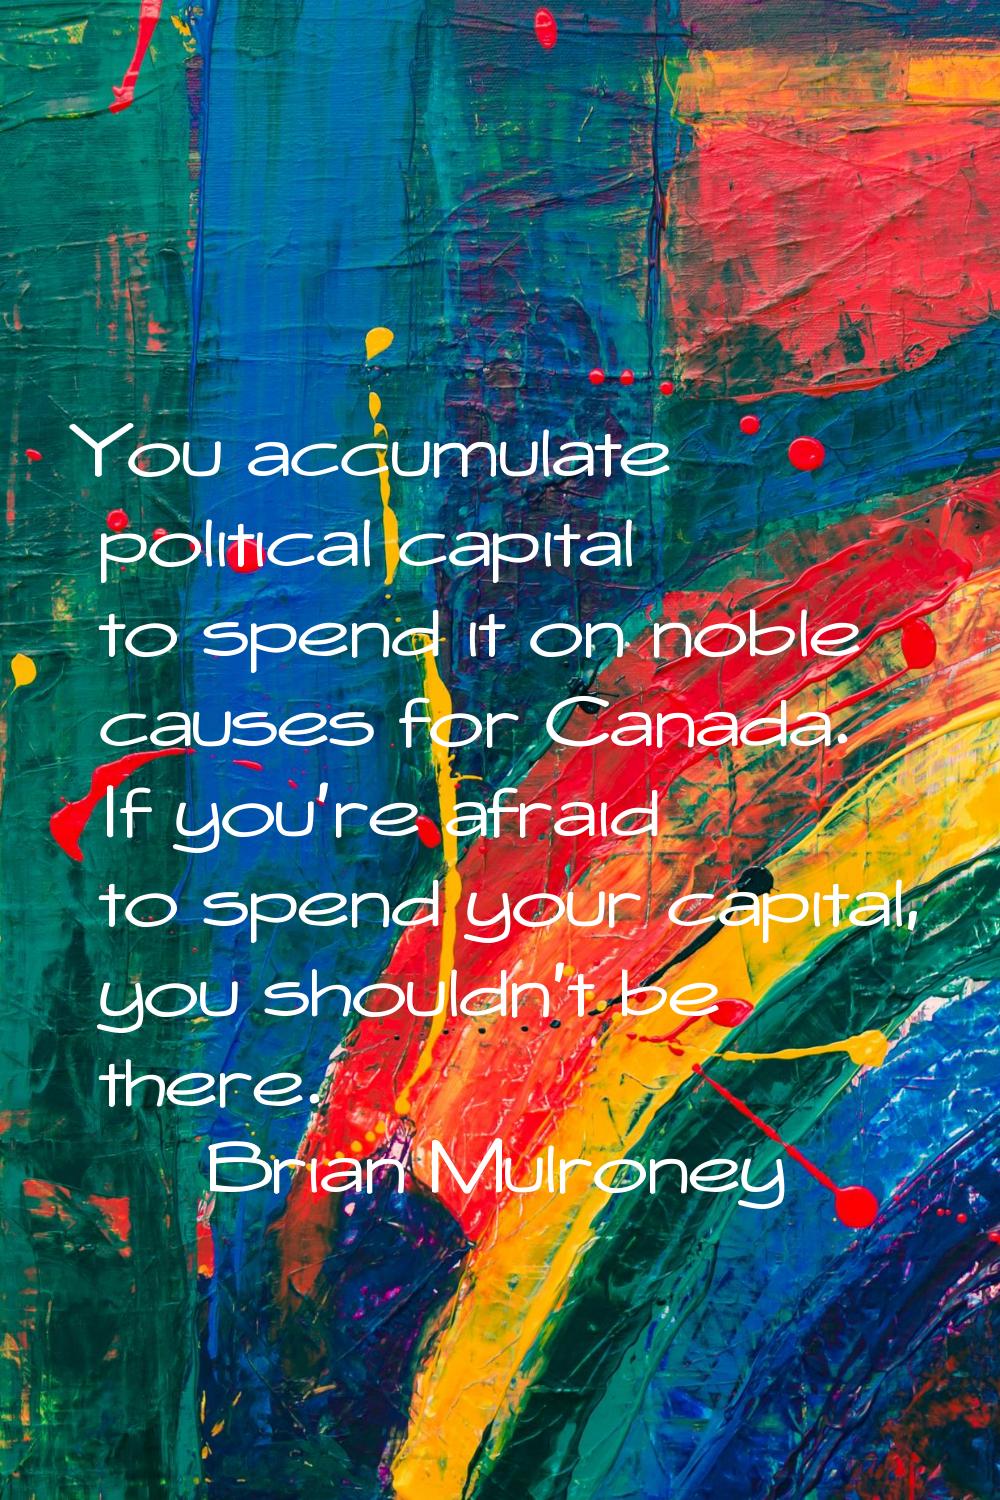 You accumulate political capital to spend it on noble causes for Canada. If you're afraid to spend 